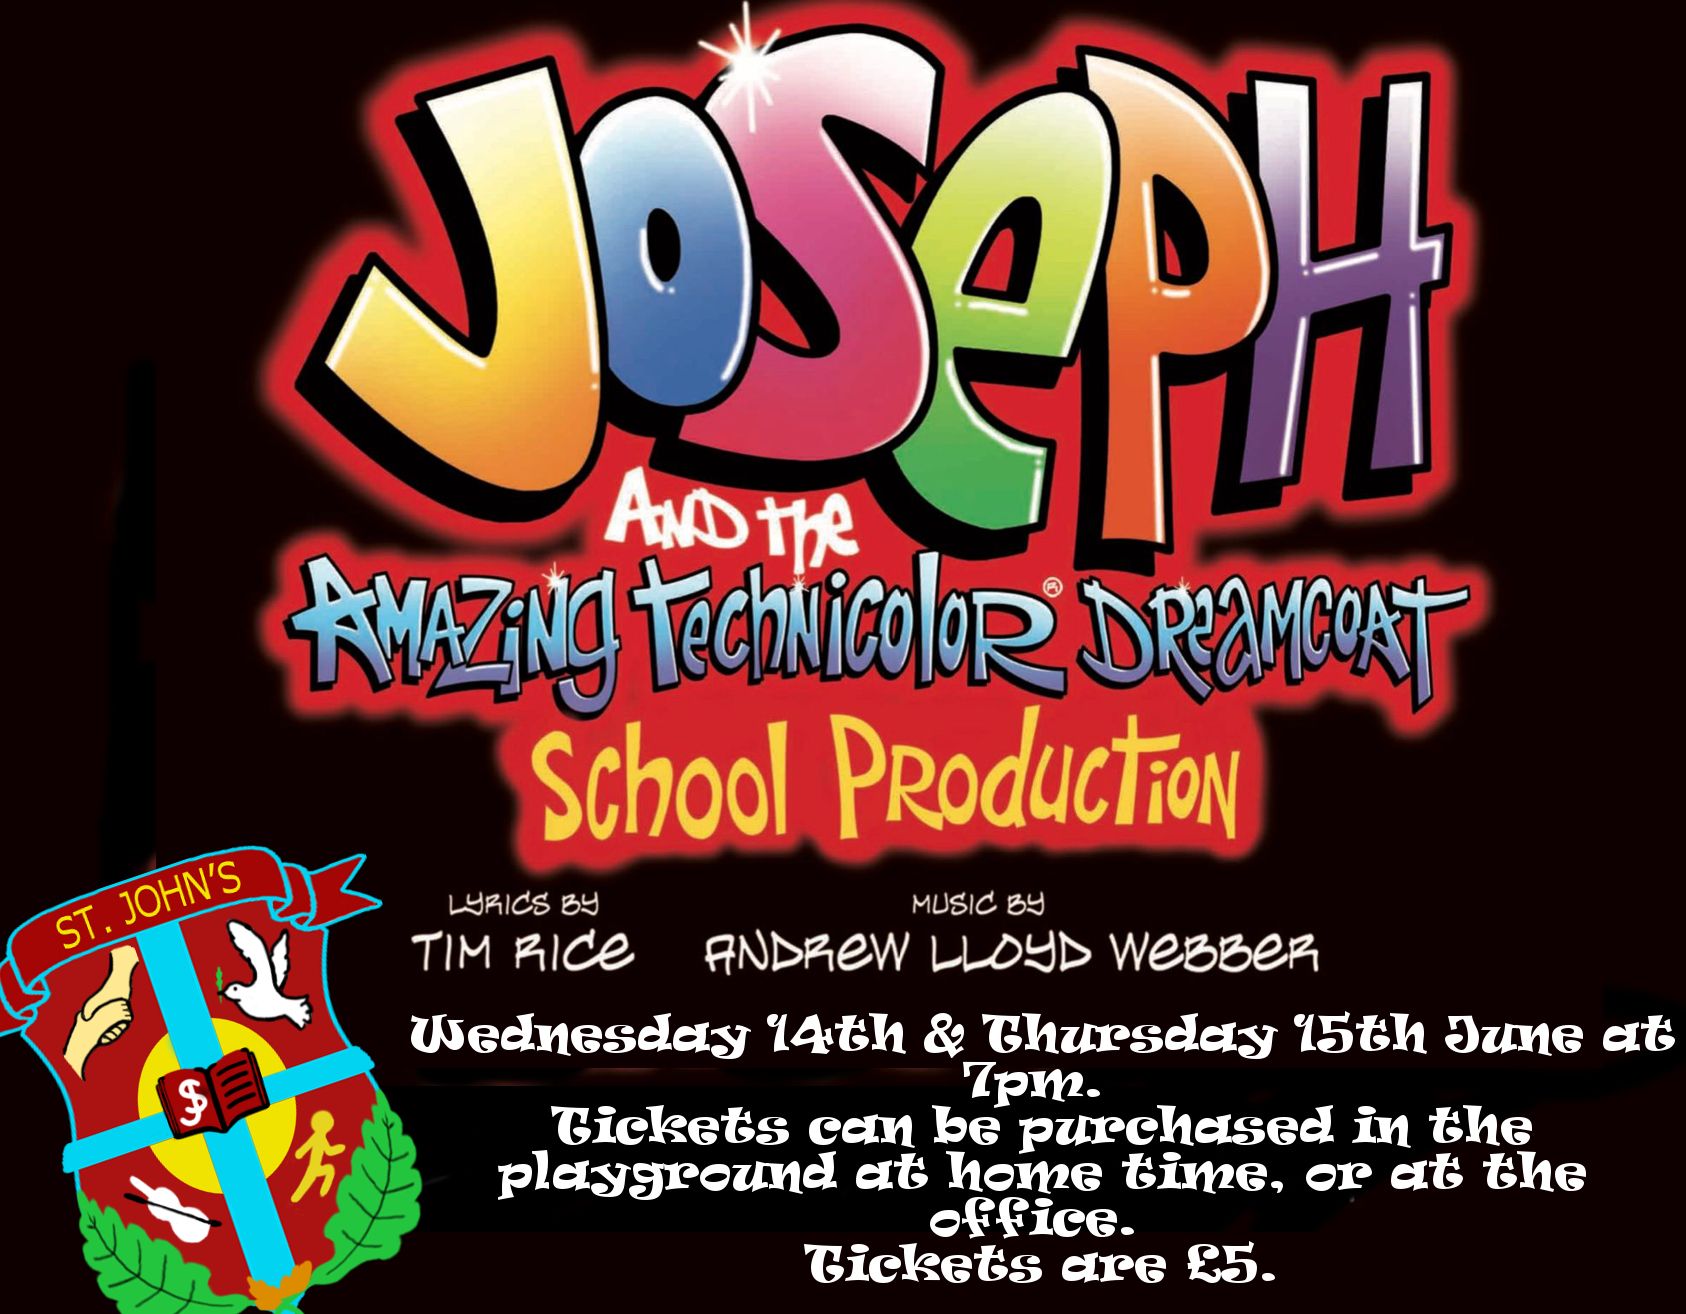 We are very excited about our school production of Joseph